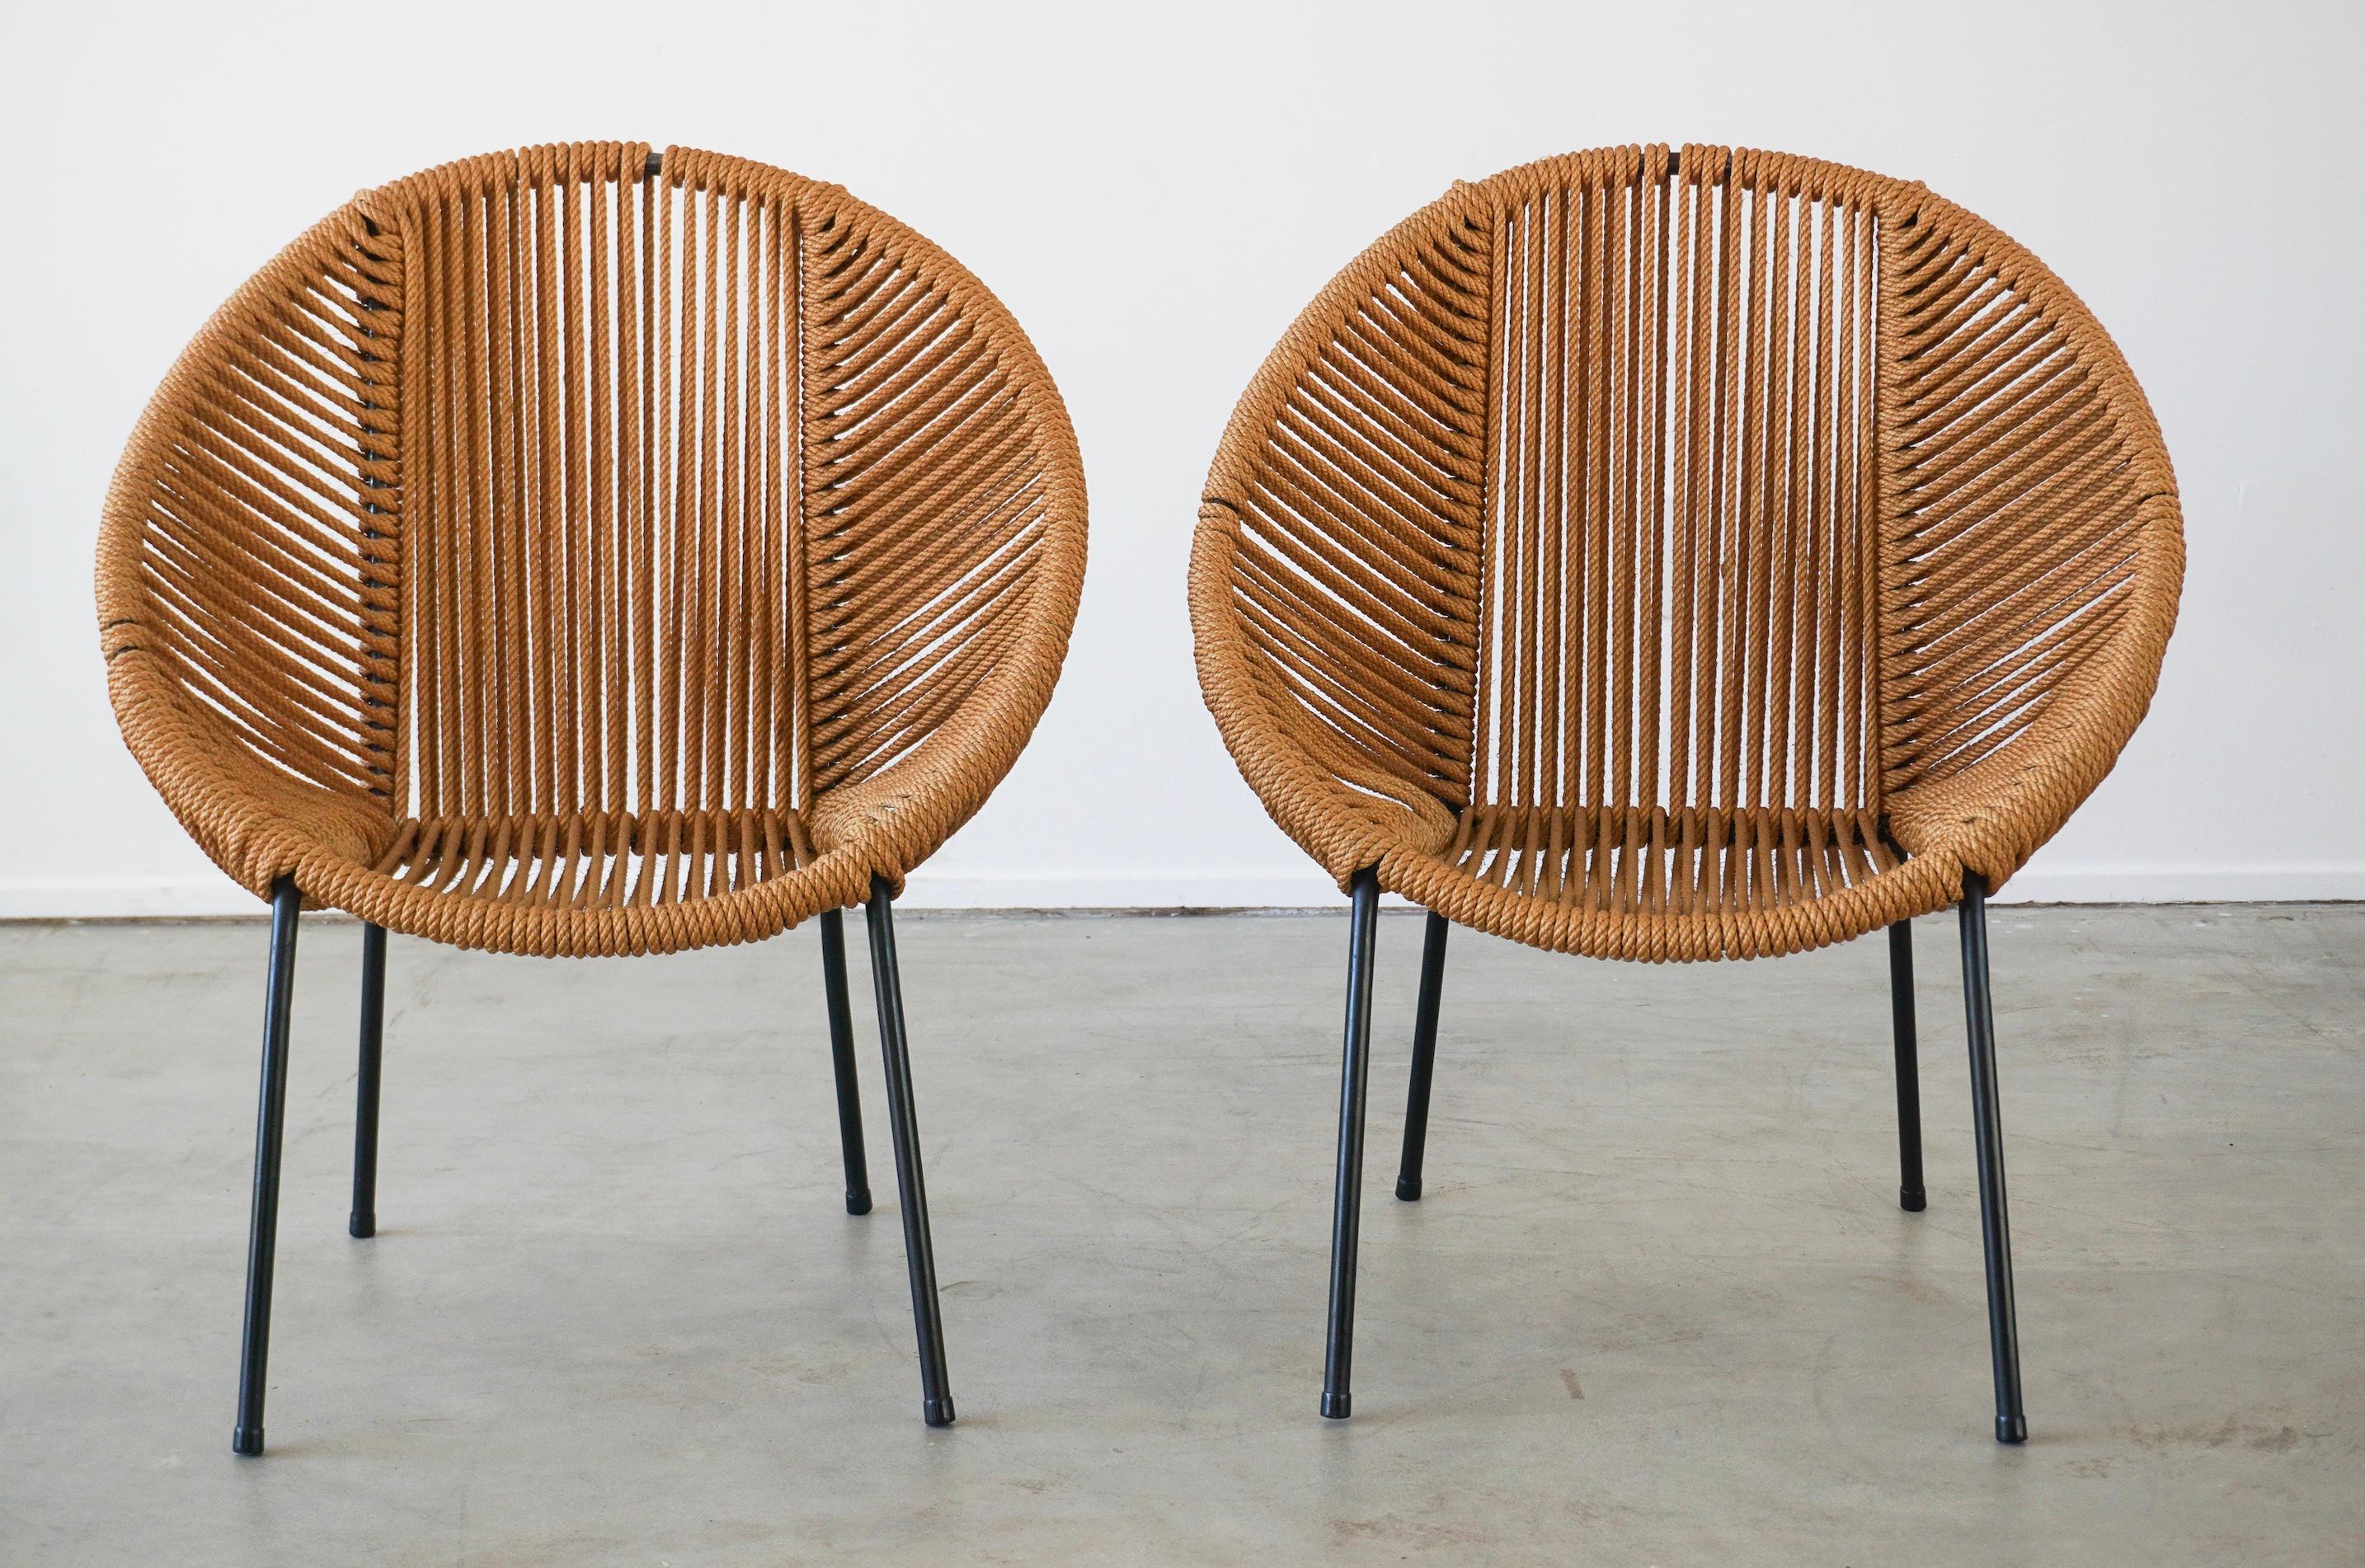 Pair of Italian rope chairs with circle hoop iron frame and rope.